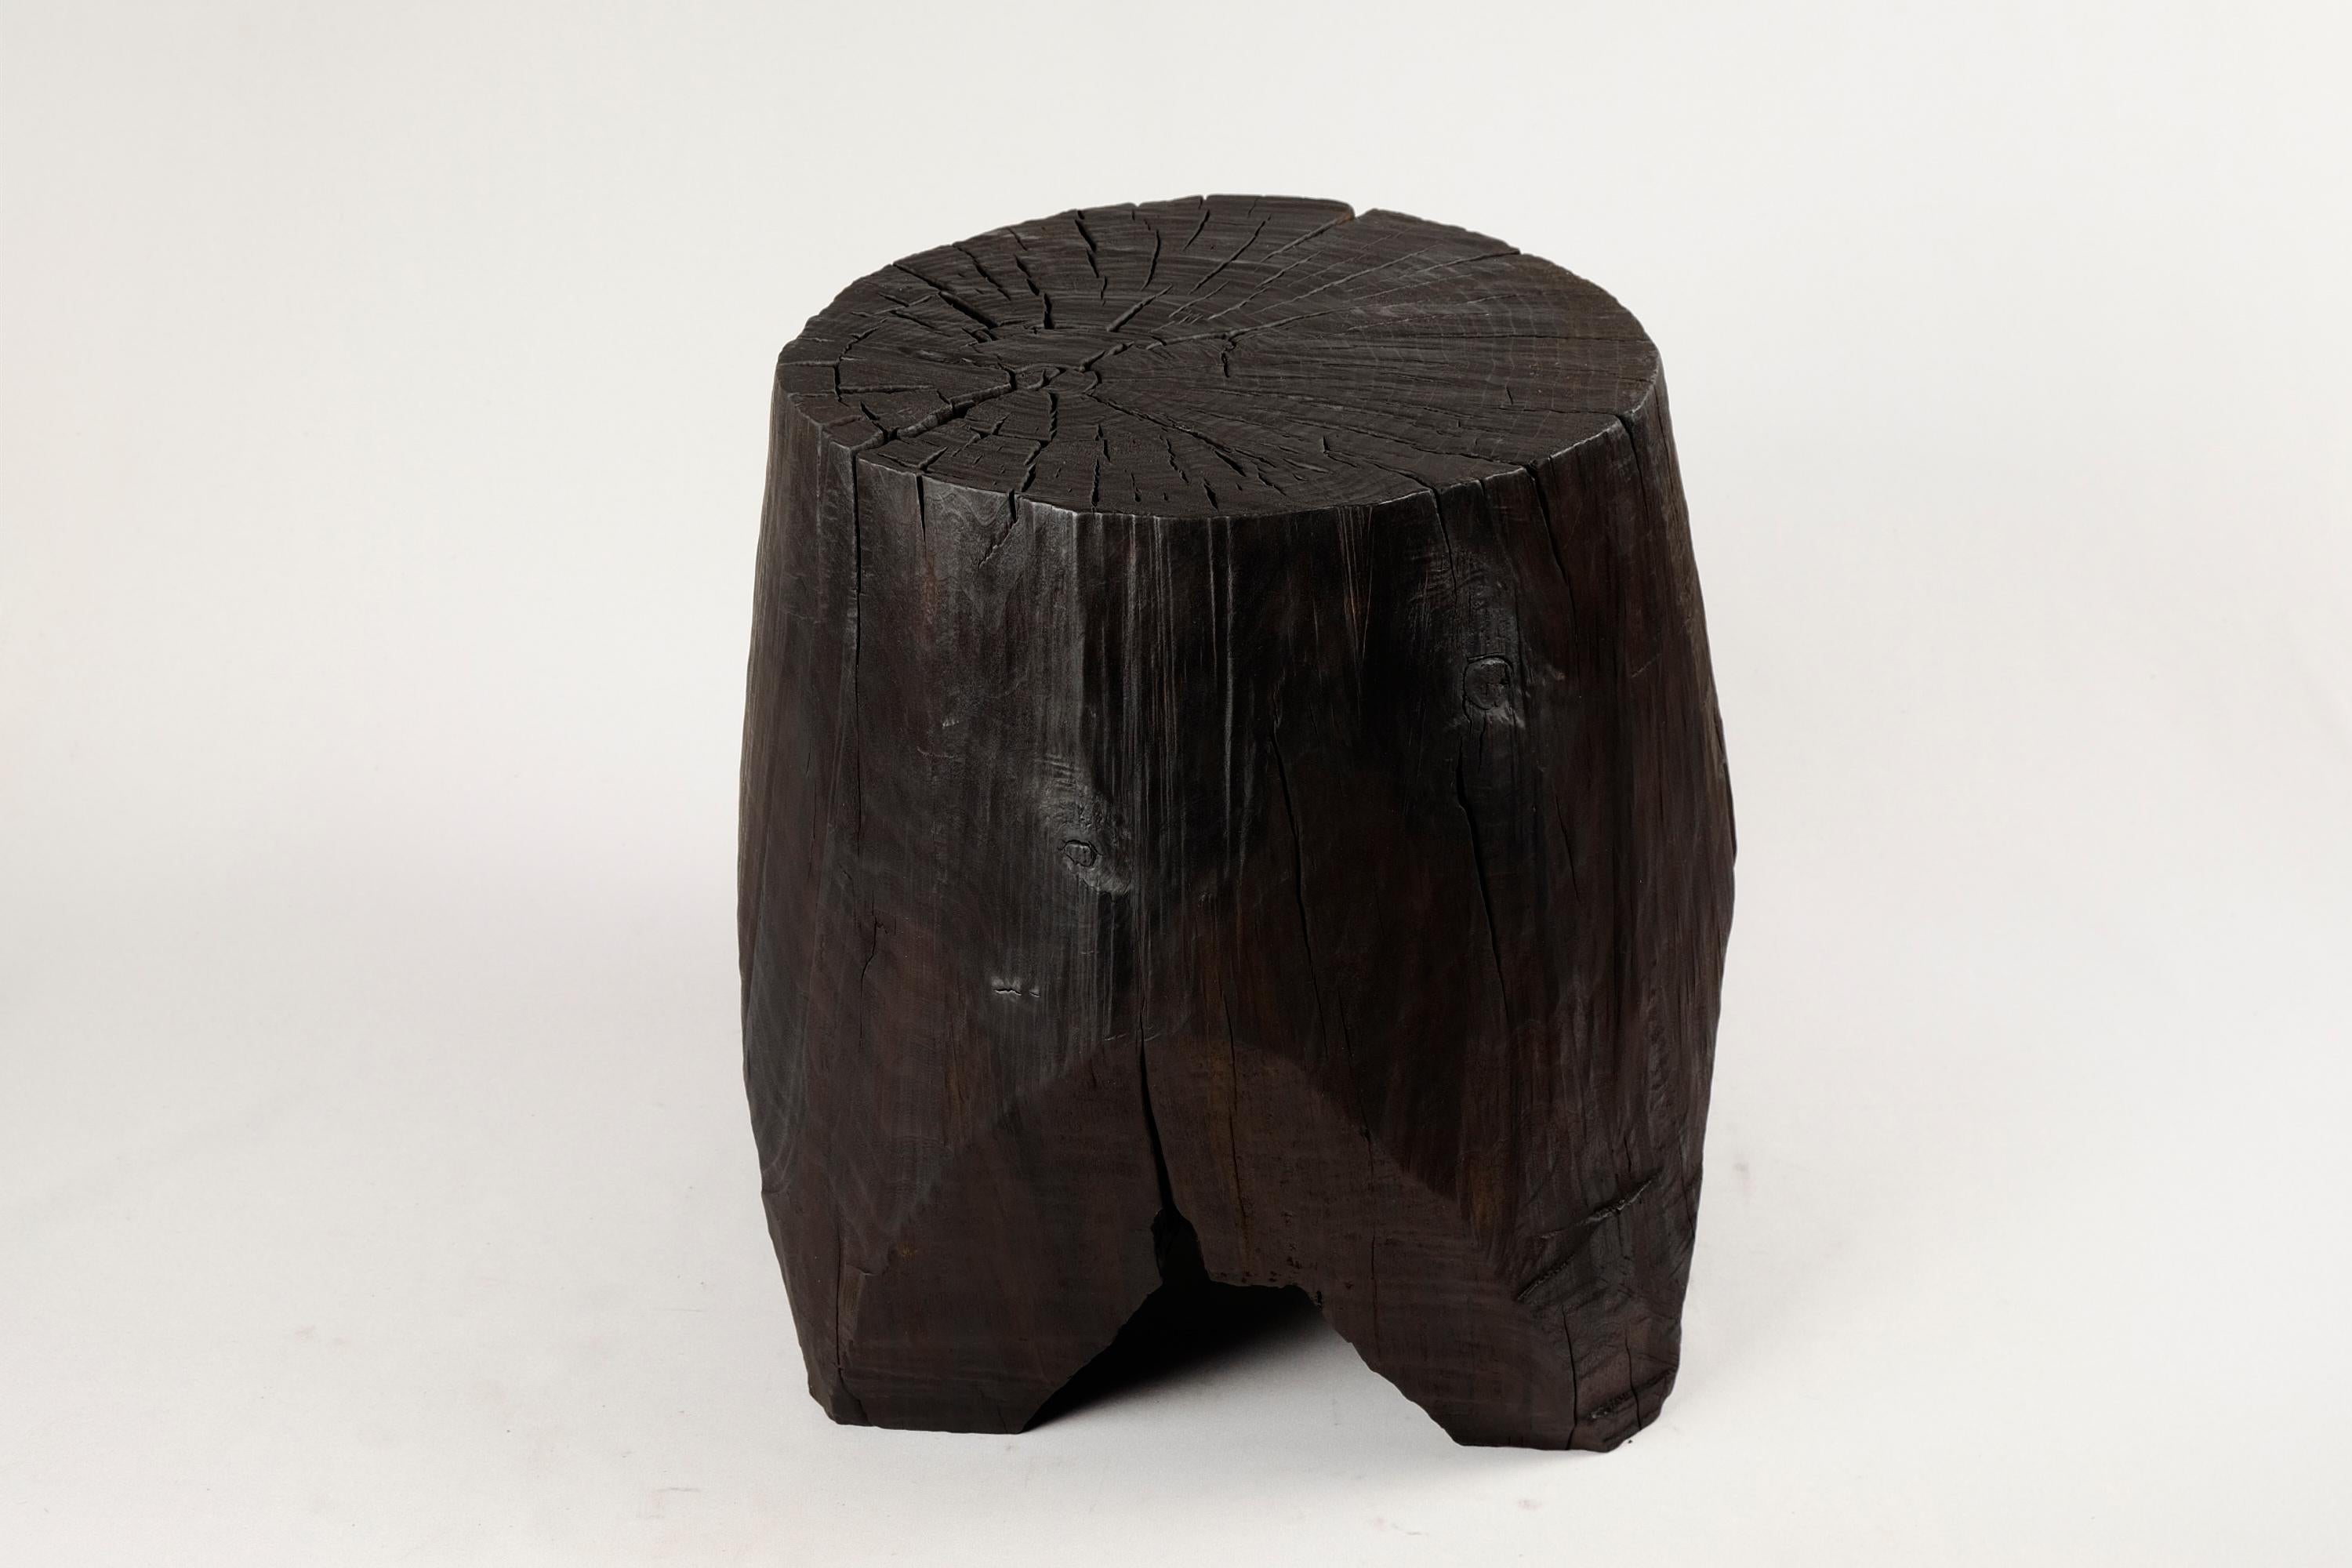 Carved Solid Burnt Wood, Side Table, Stool, Original Contemporary Design